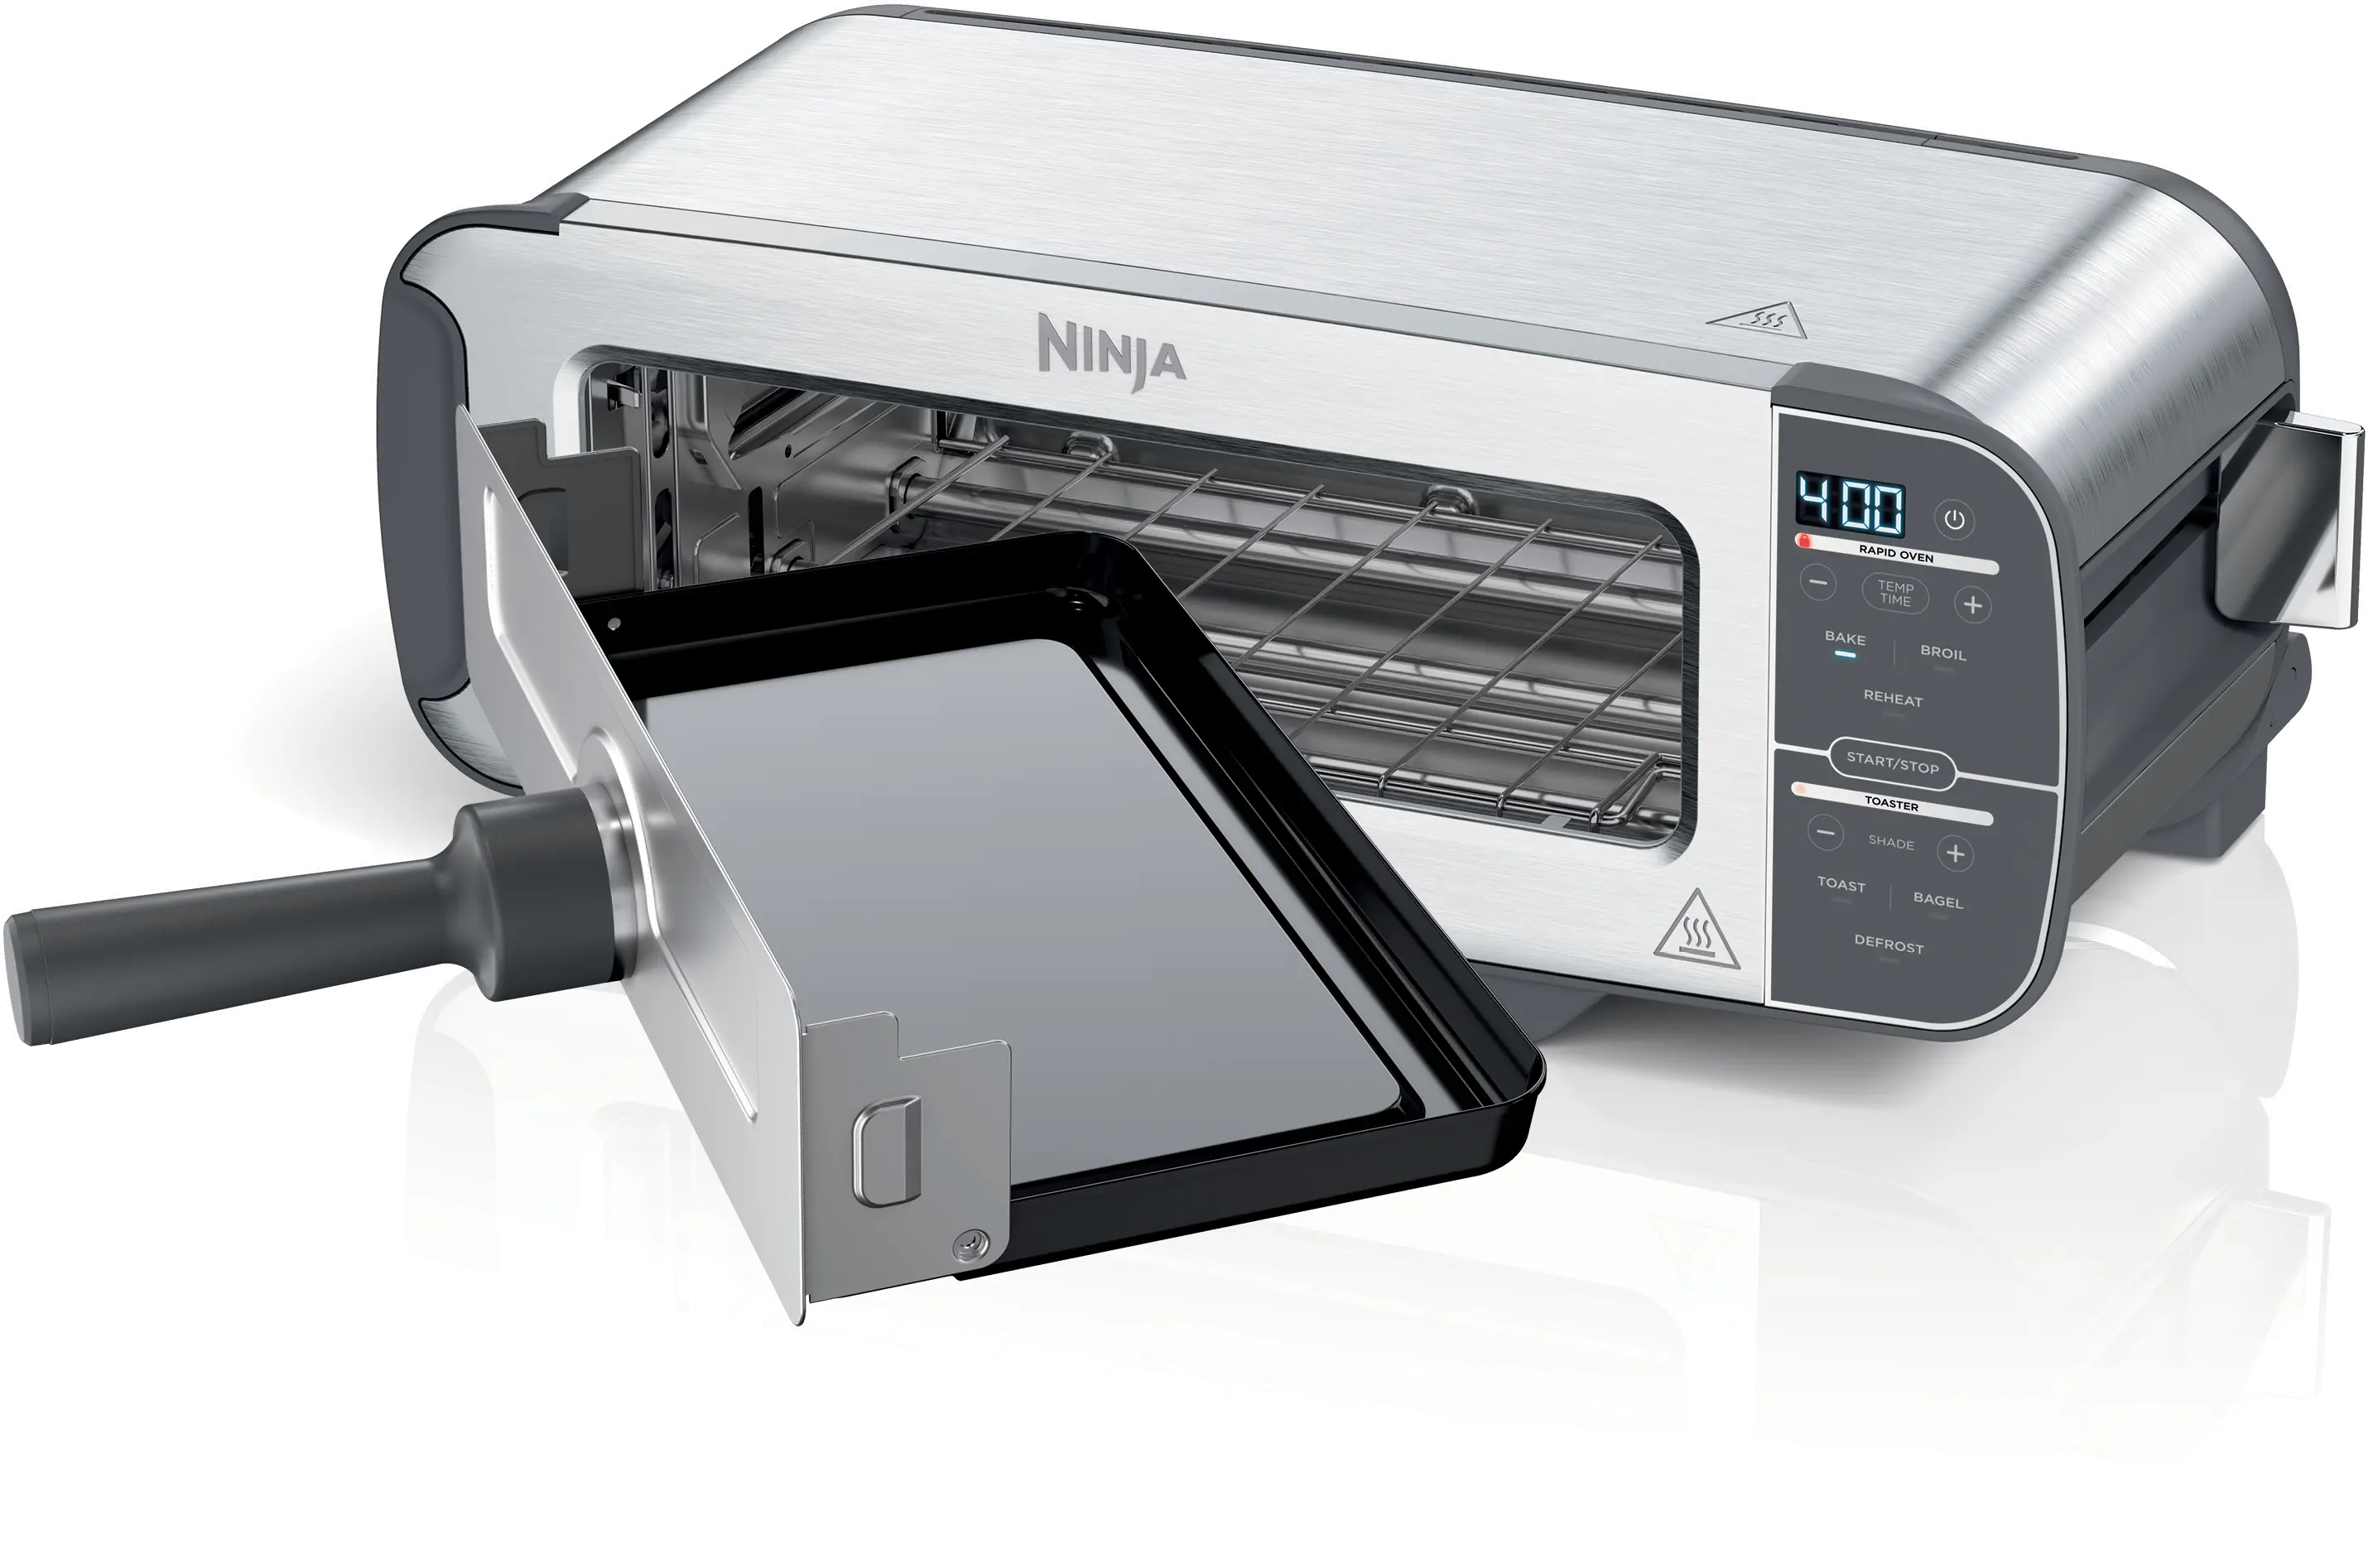 https://static.rcwilley.com/products/113343574/Ninja-Foodi-2-in-1-Flip-Toaster-Oven-rcwilley-image1.webp